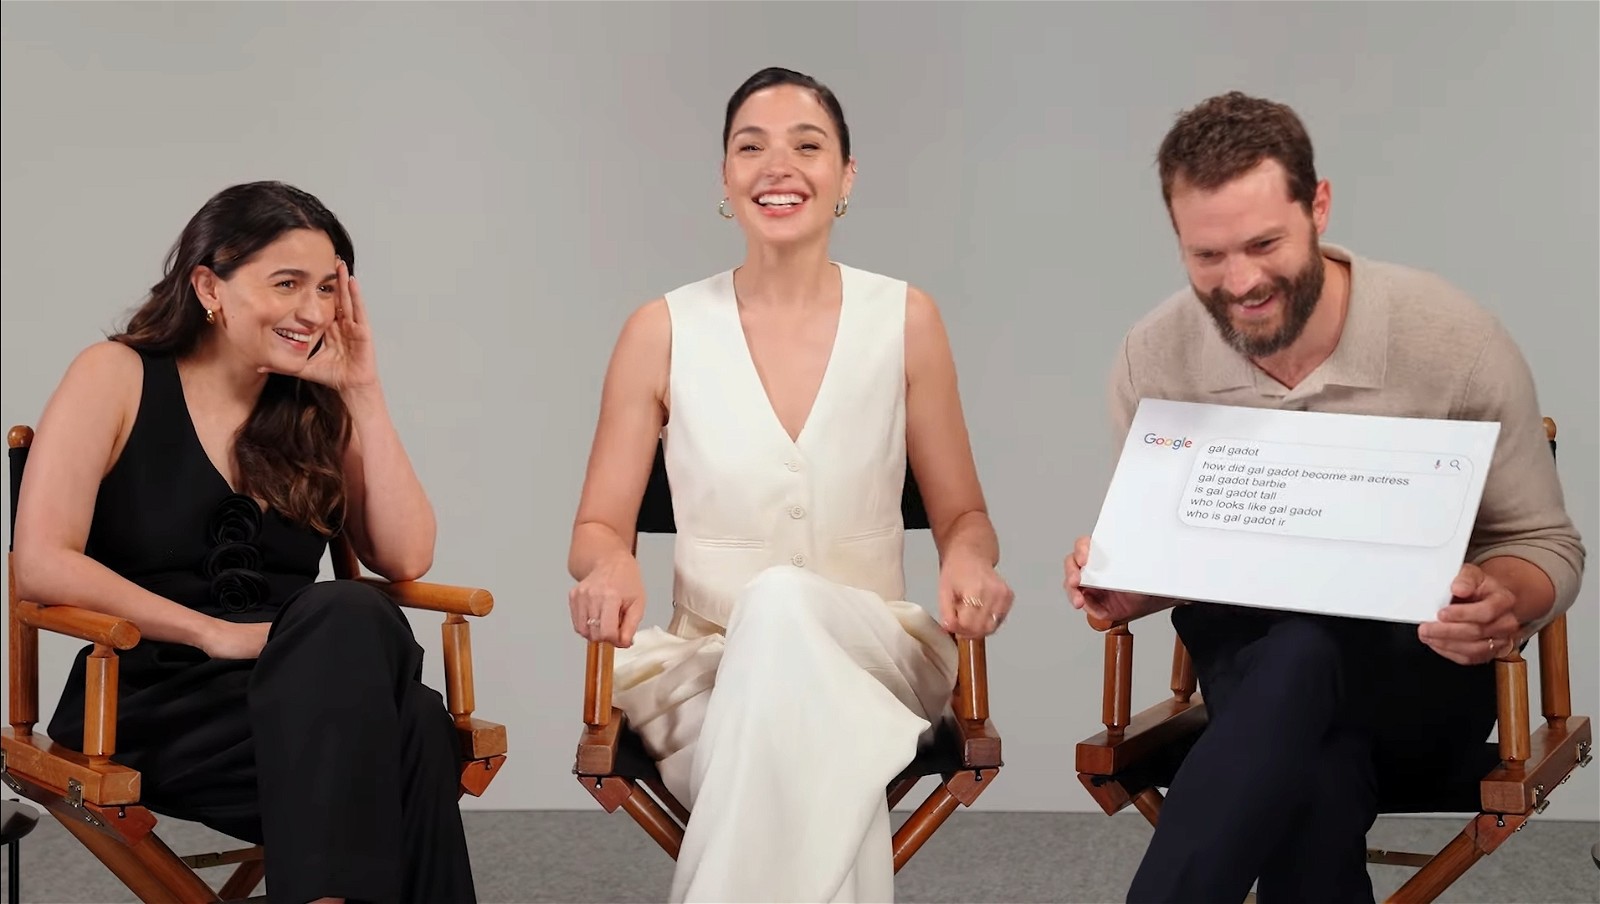 Alia Bhatt, Gal Gadot, and Jamie Dornan in an interview with WIRED